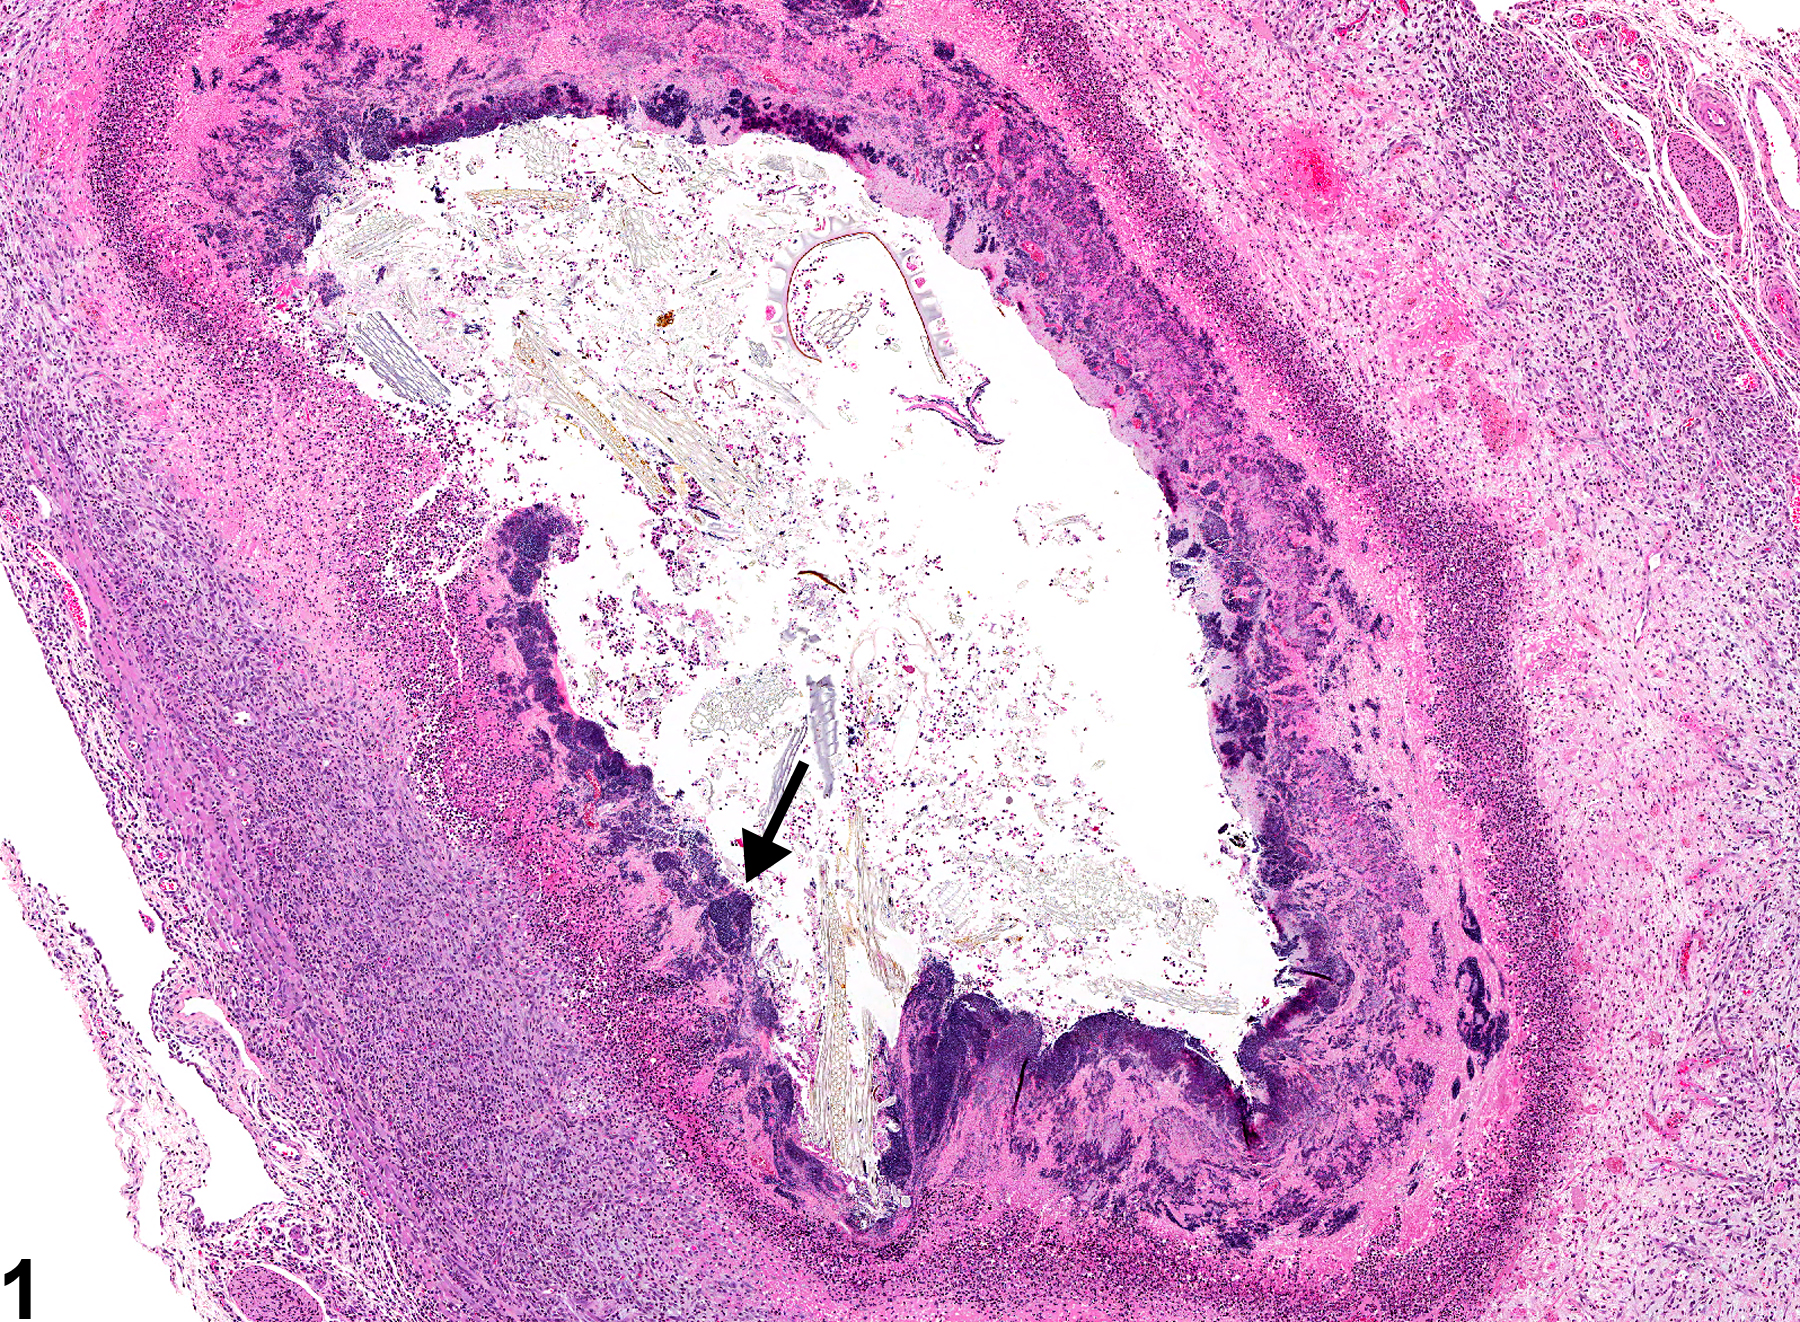 Image of inflammation in the esophagus from a female F344/N rat in a subchronic study